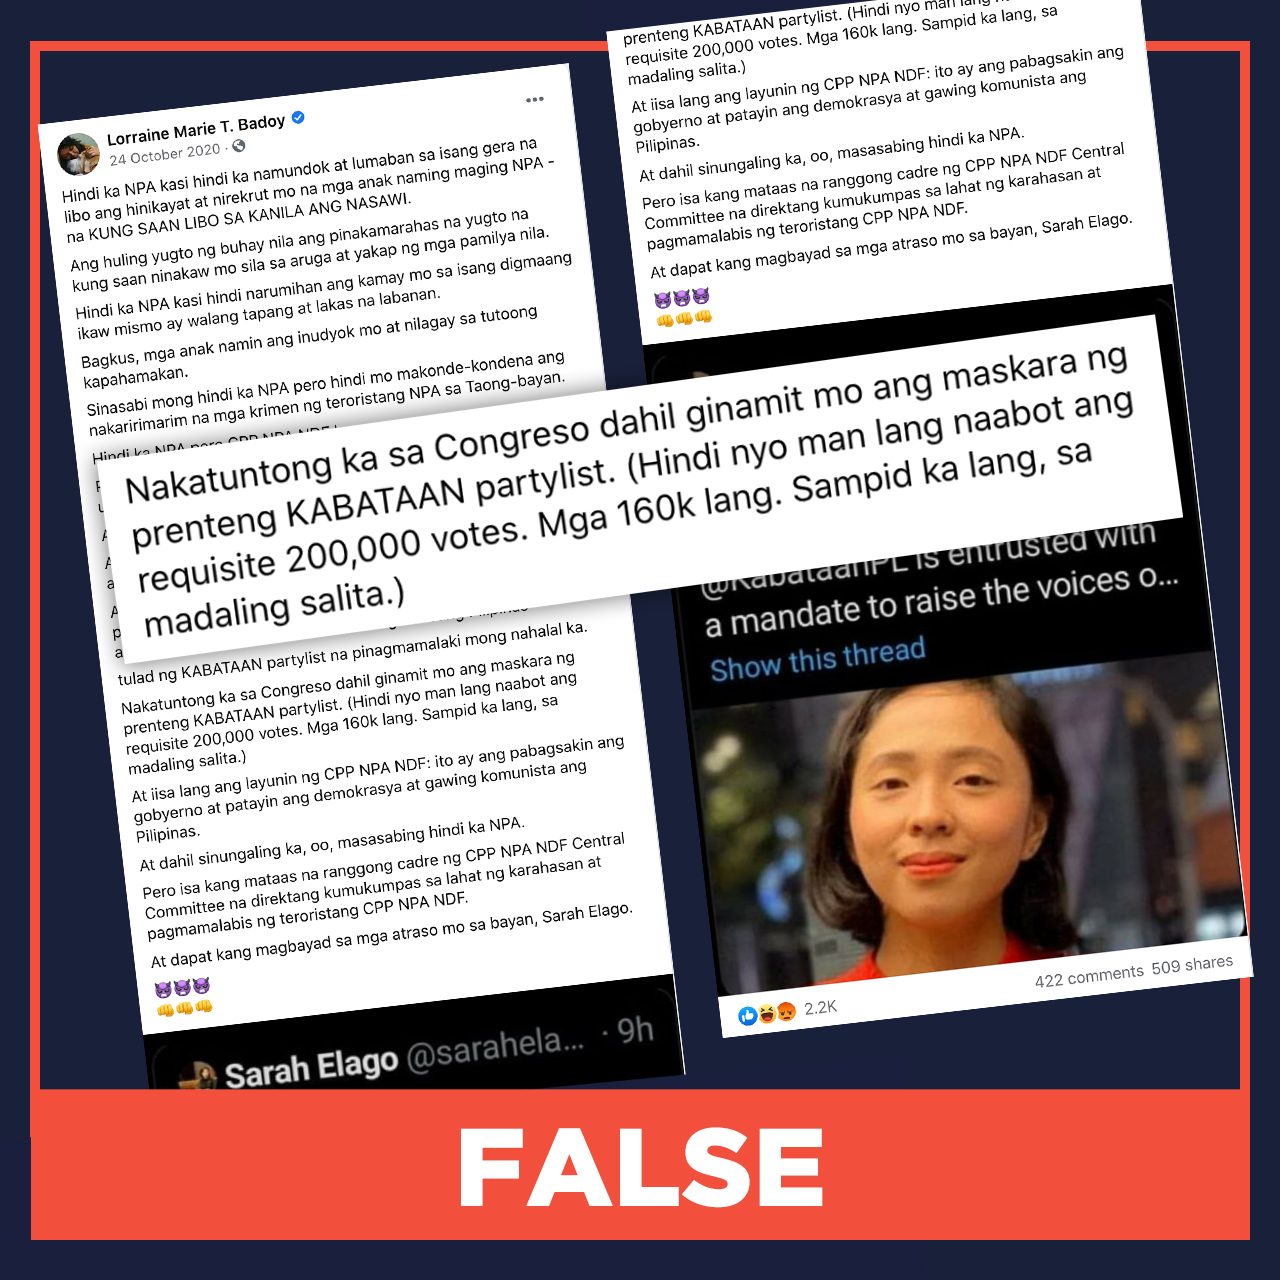 FALSE: Kabataan Partylist received about 160,000 votes in 2019 election